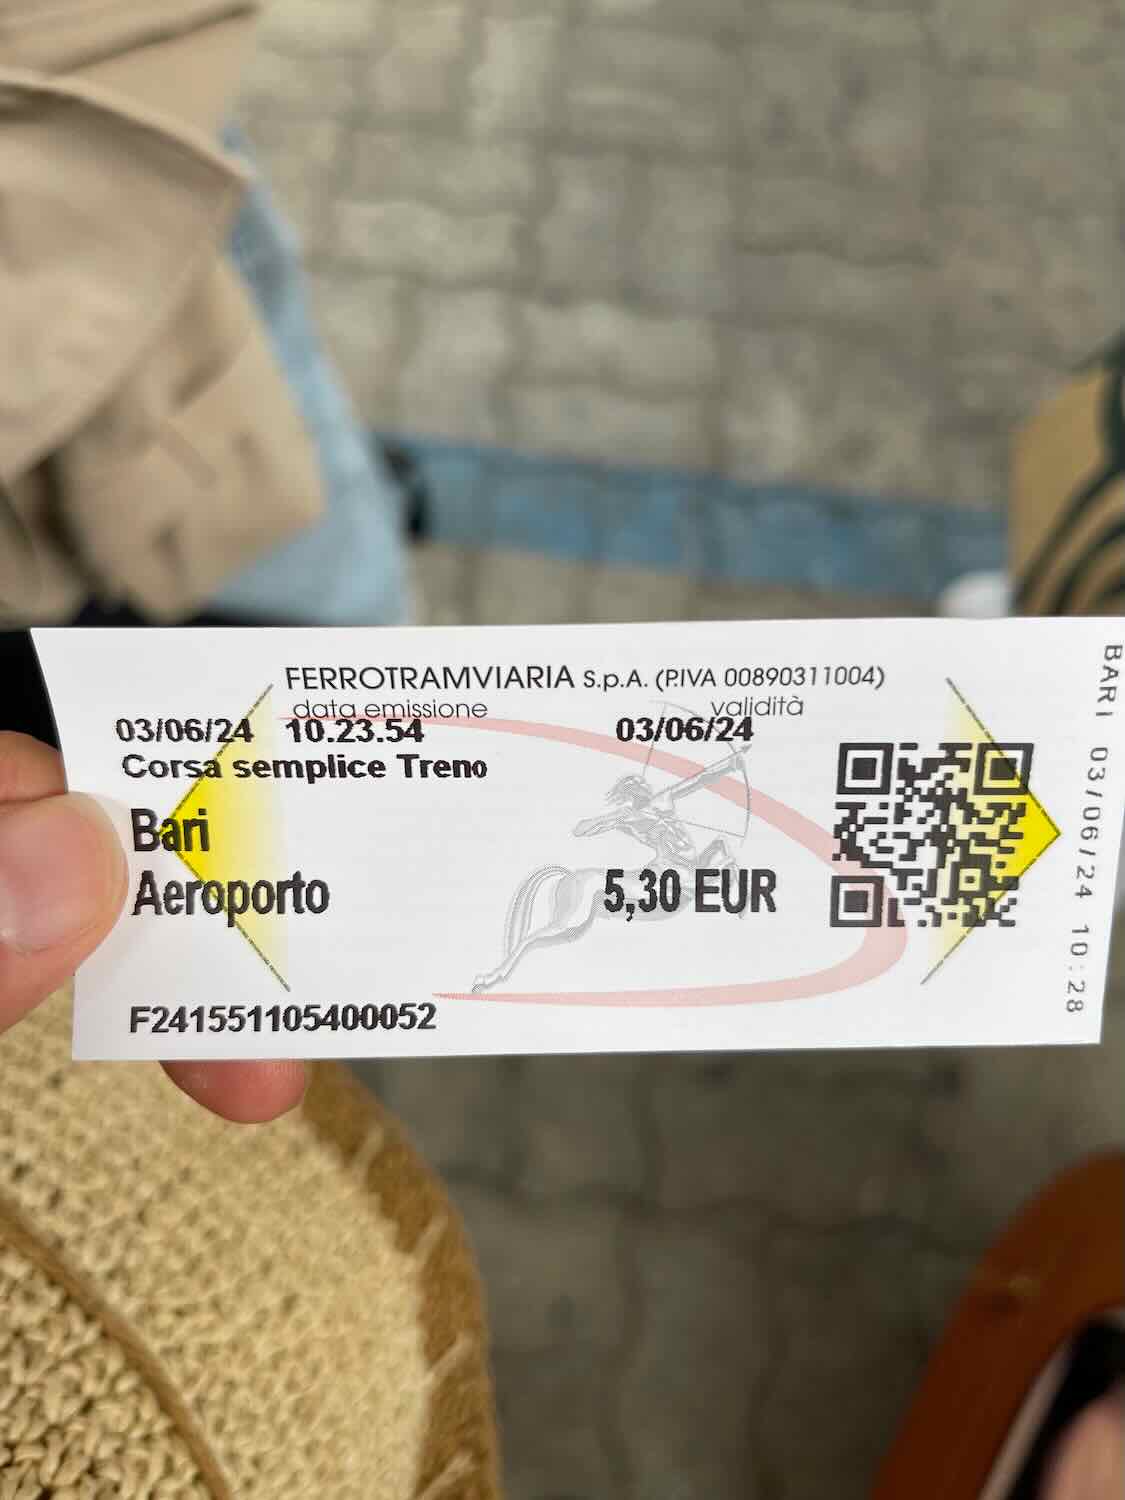 A train ticket from Bari to Aeroporto costing 5.30 EUR, issued by Ferrovie del Nord Barese. The ticket is held by someone with a woven bag visible in the background.